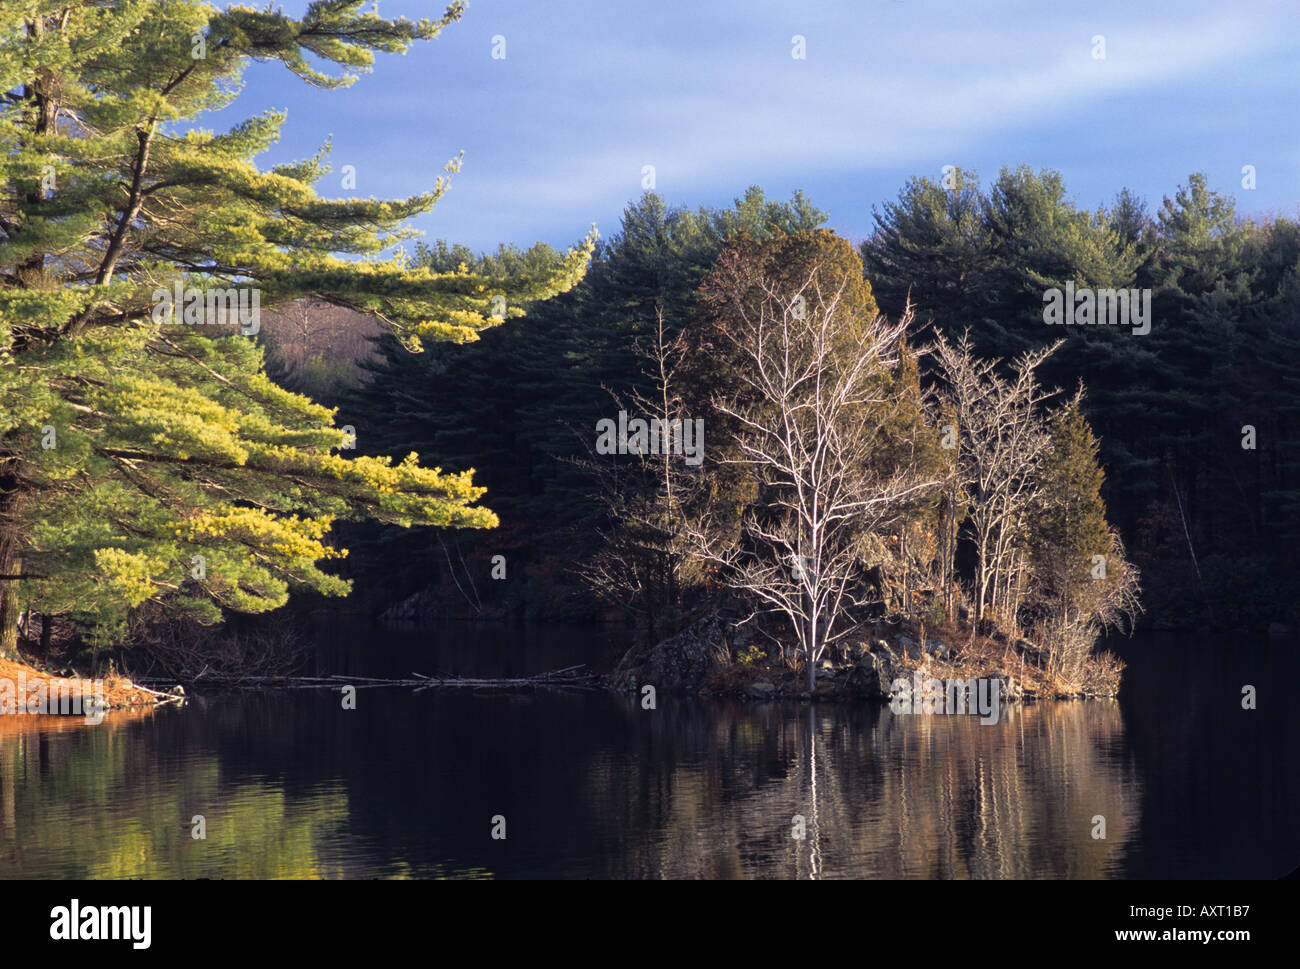 Landscape with lake and trees Connecticut New England United States Stock Photo